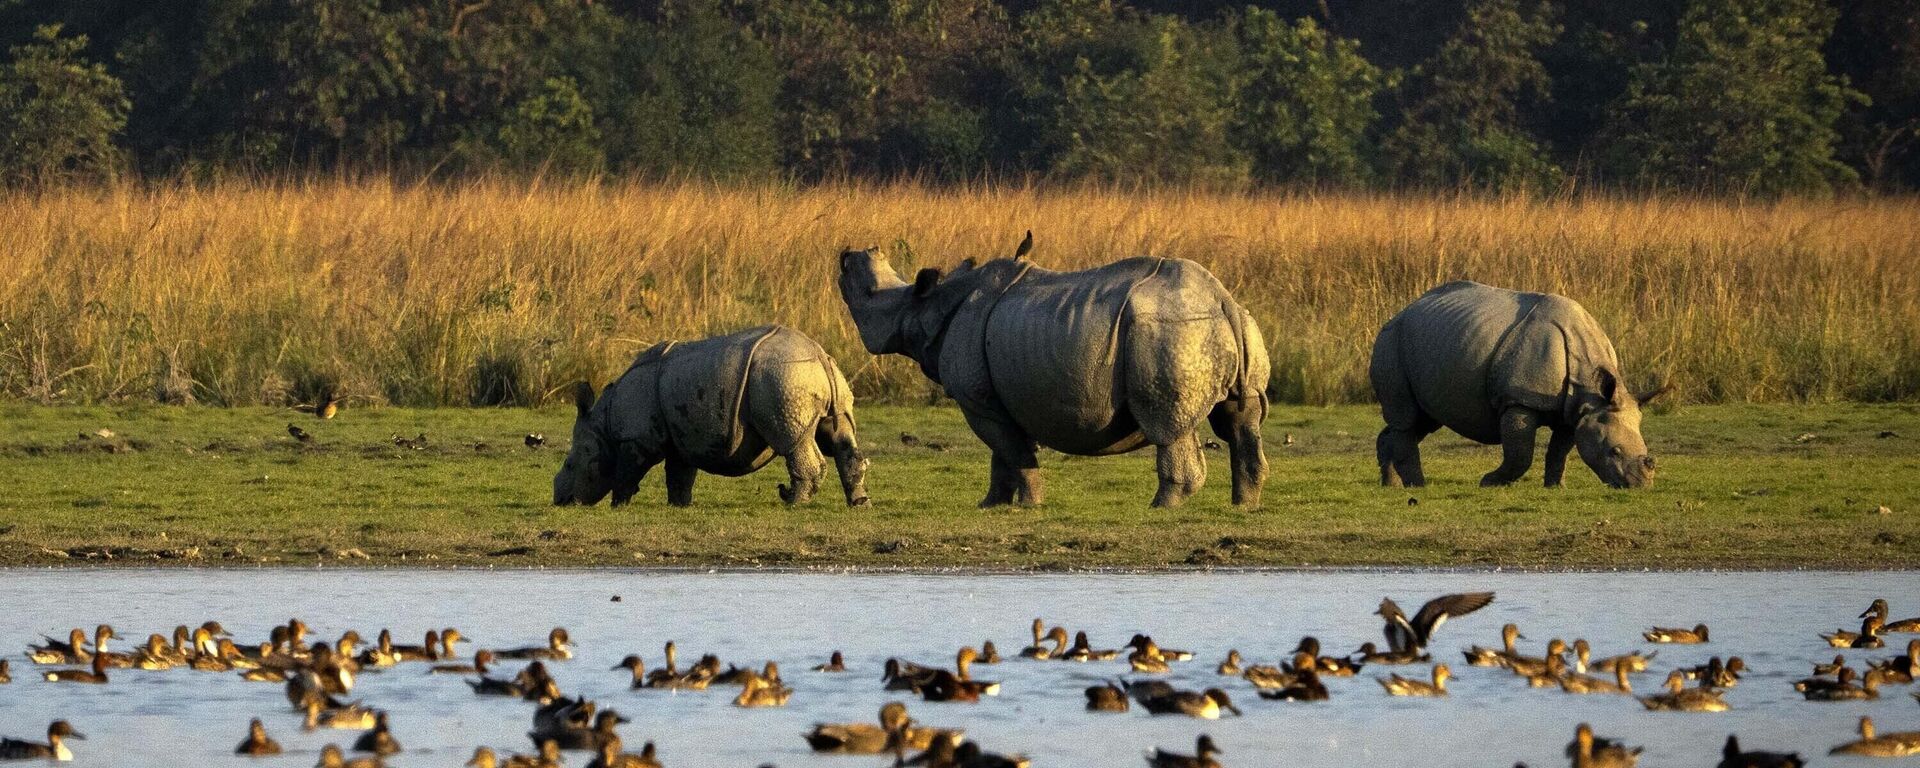 One horned Rhinoceros graze at the Pobitora wildlife sanctuary on the outskirts of Guwahati, India, Tuesday, Dec. 6, 2022. The sanctuary is known for its Indian one-horned rhino population.  - Sputnik International, 1920, 20.01.2023